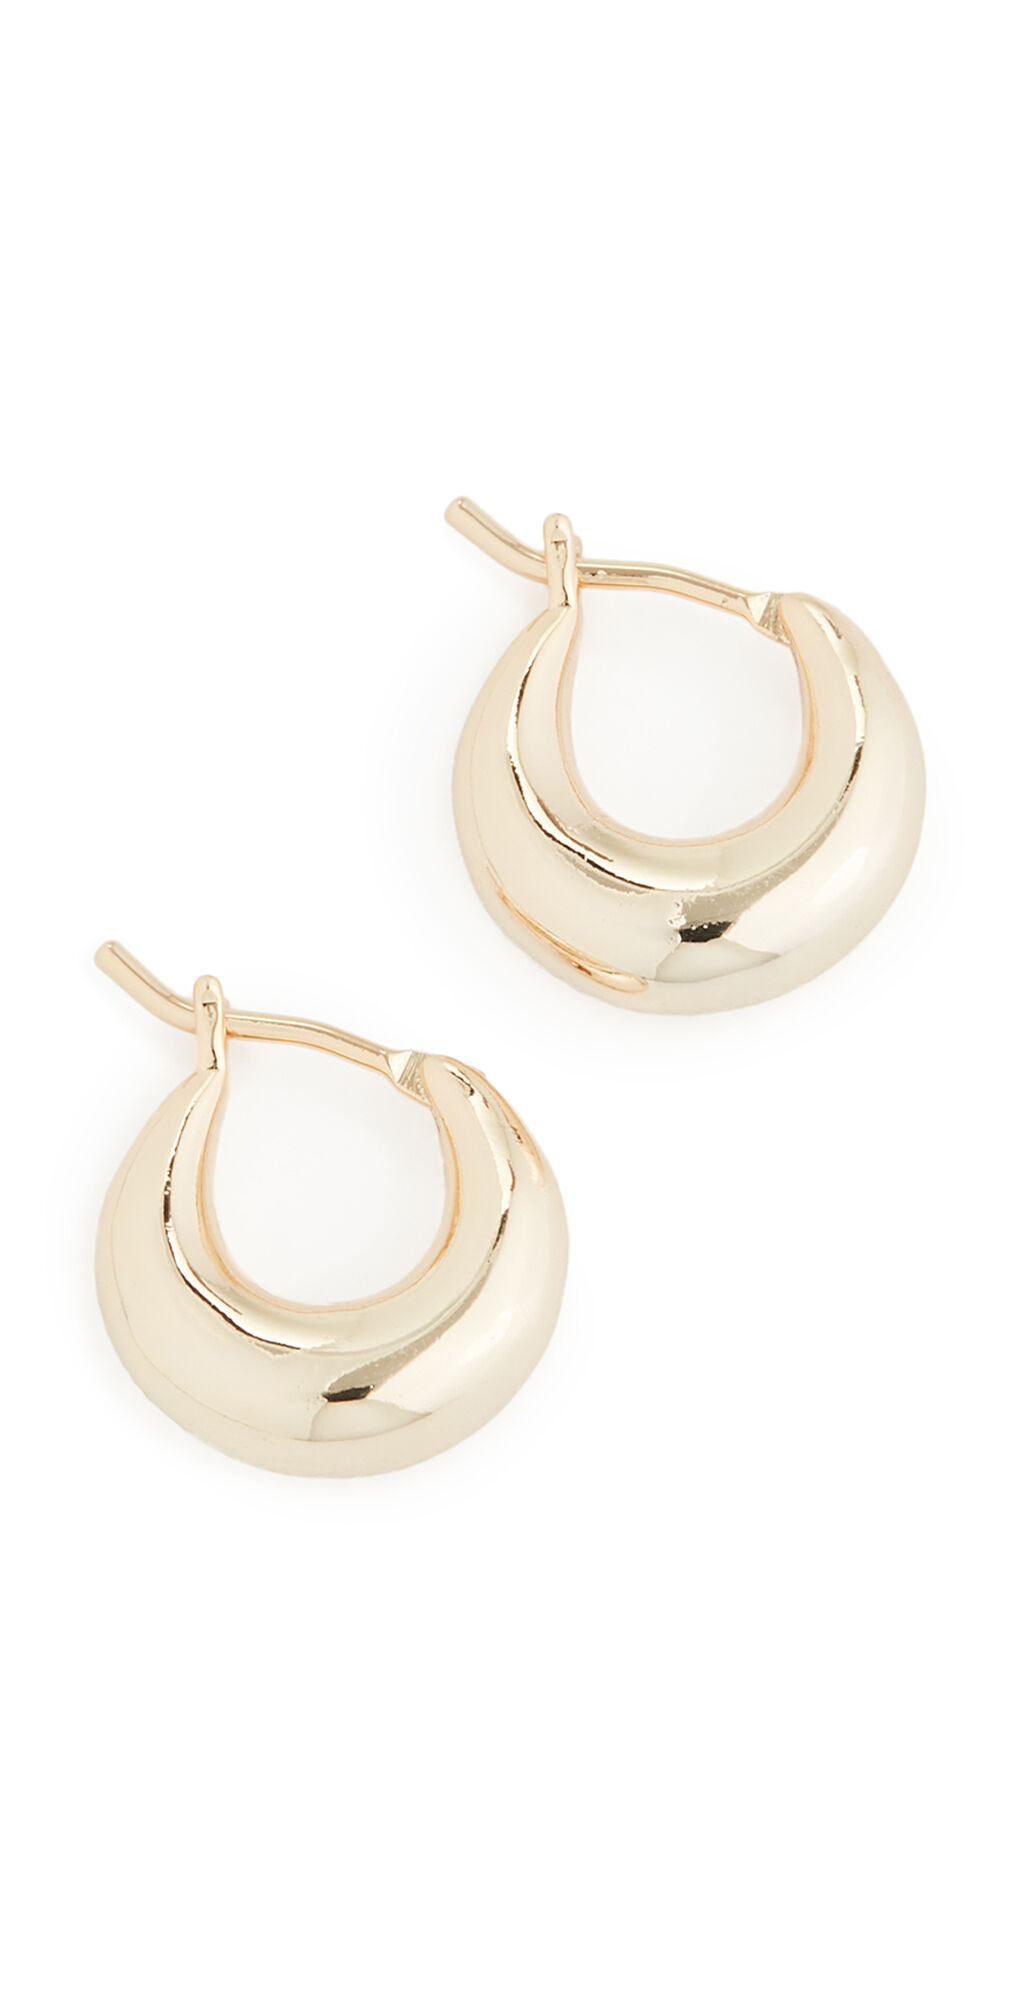 Loeffler Randall Adeline Mini Dome Hoops Gold One Size  Gold  size:One Size